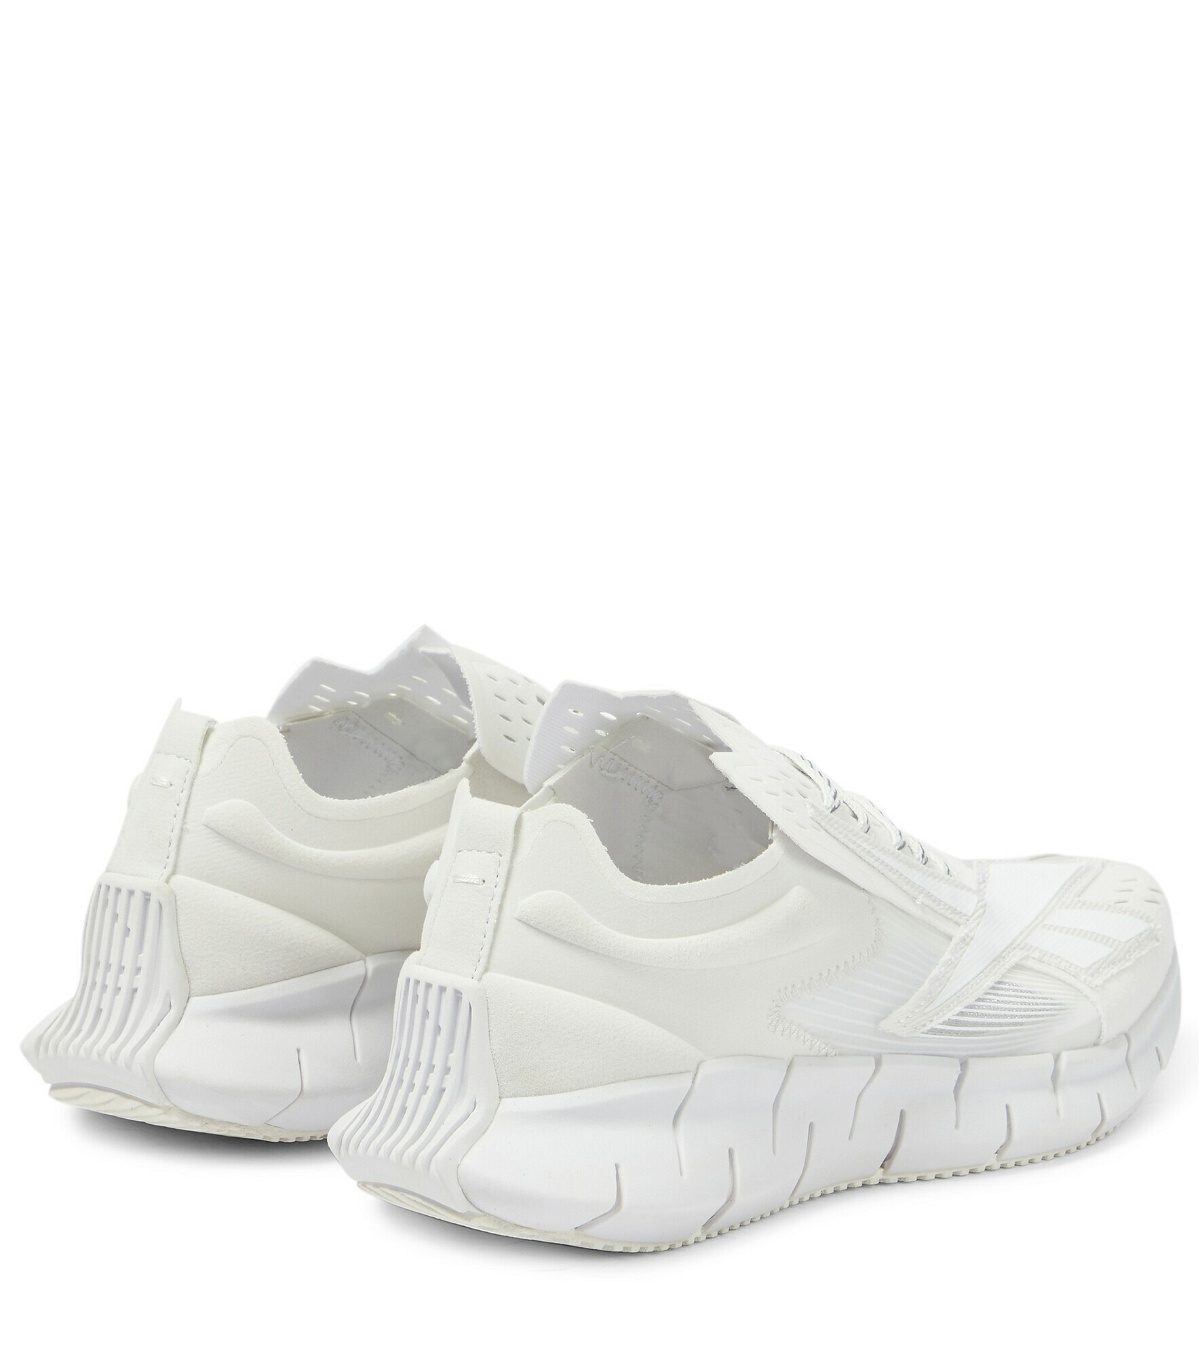 Maison Margiela REEBOK Tech Fabric PROJECT 0 ZS MEMORY OF Sneakers men -  Glamood Outlet